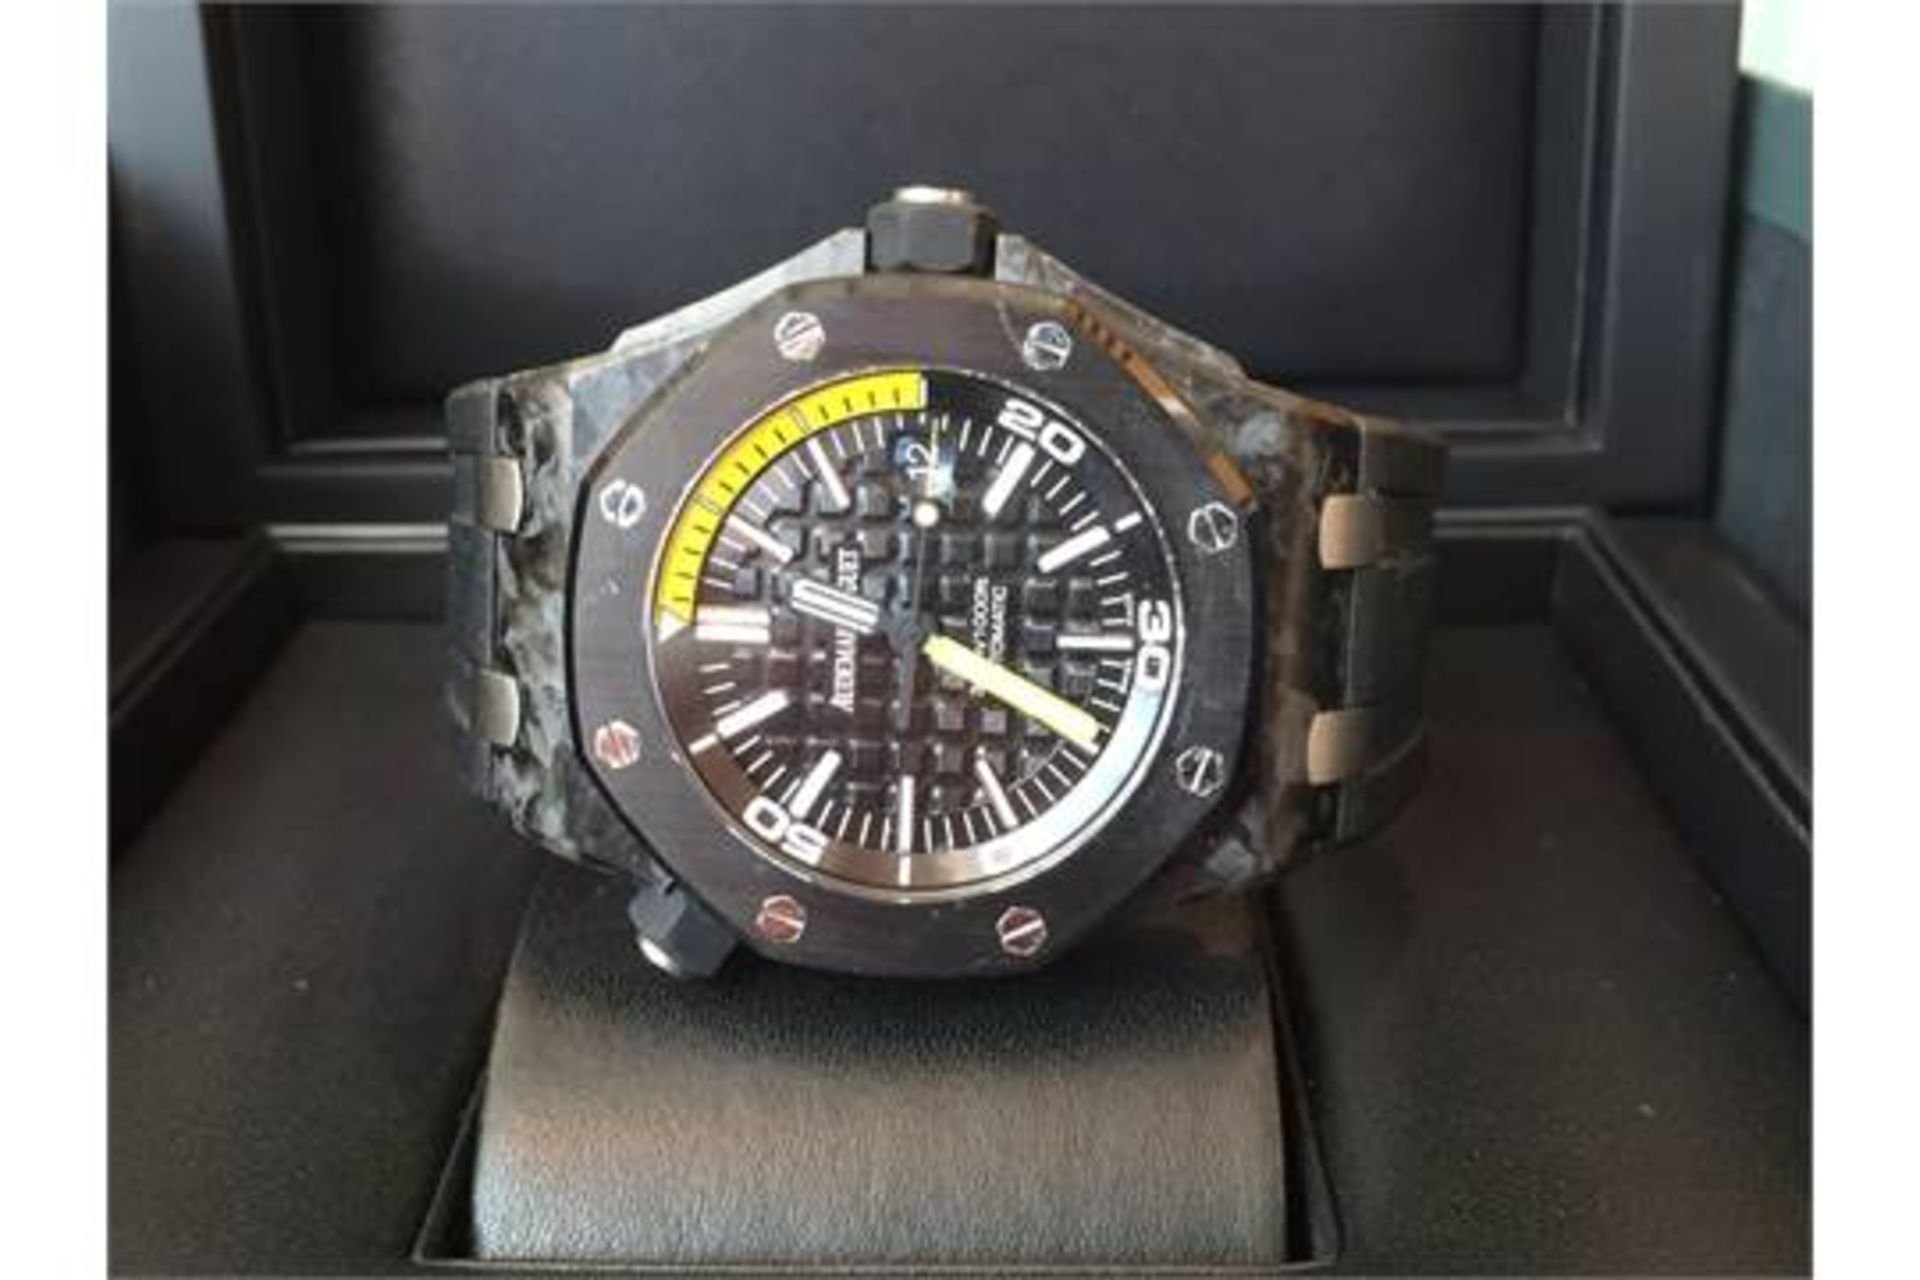 RRP PRROX £19,000 2014 AUDEMARS PIGUET ROYAL OAK OFF SHORE 44ml CERAMIC MODEL WITH BOX & PAPERS ON - Image 2 of 9